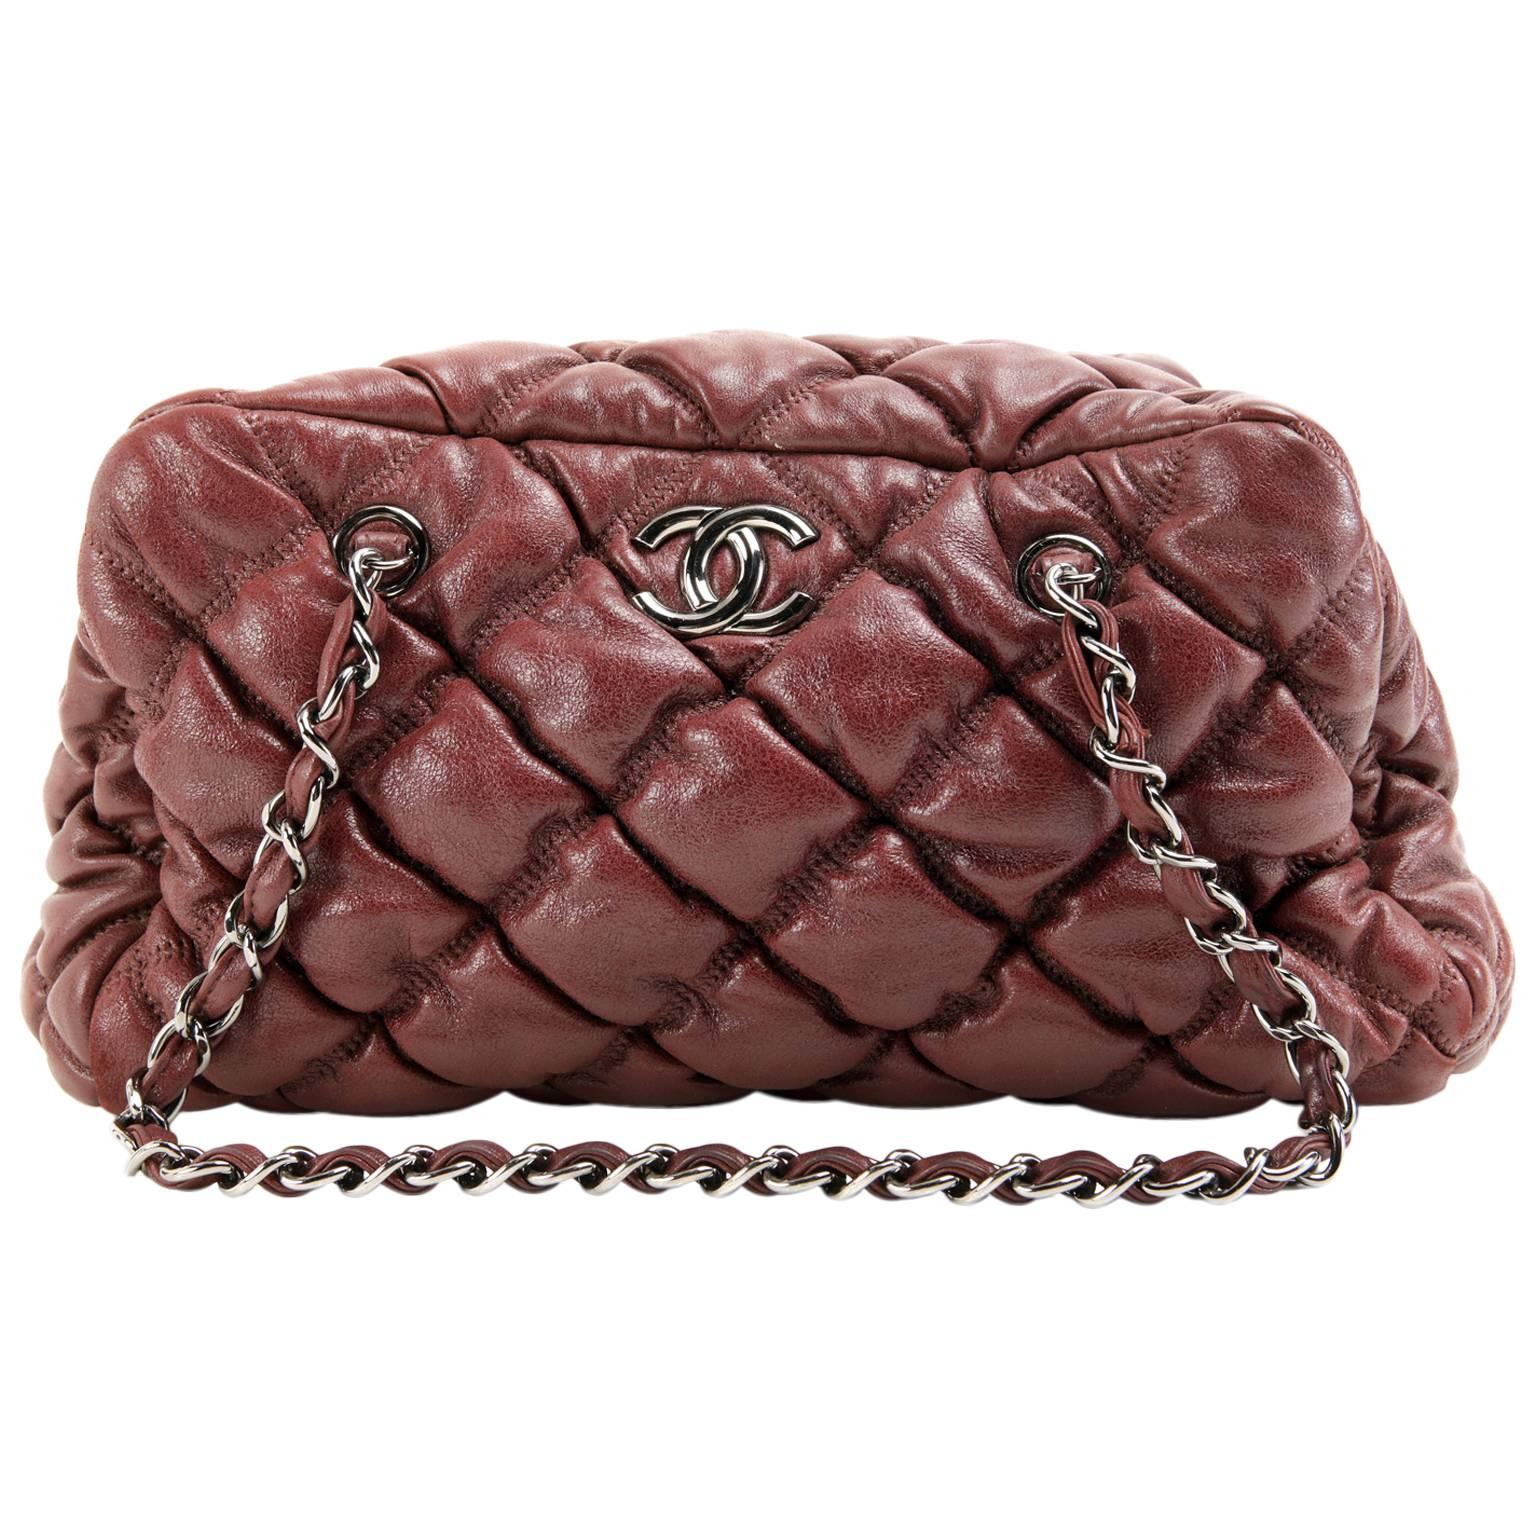 Chanel Dark Red Leather Bubble Quilt Bag For Sale